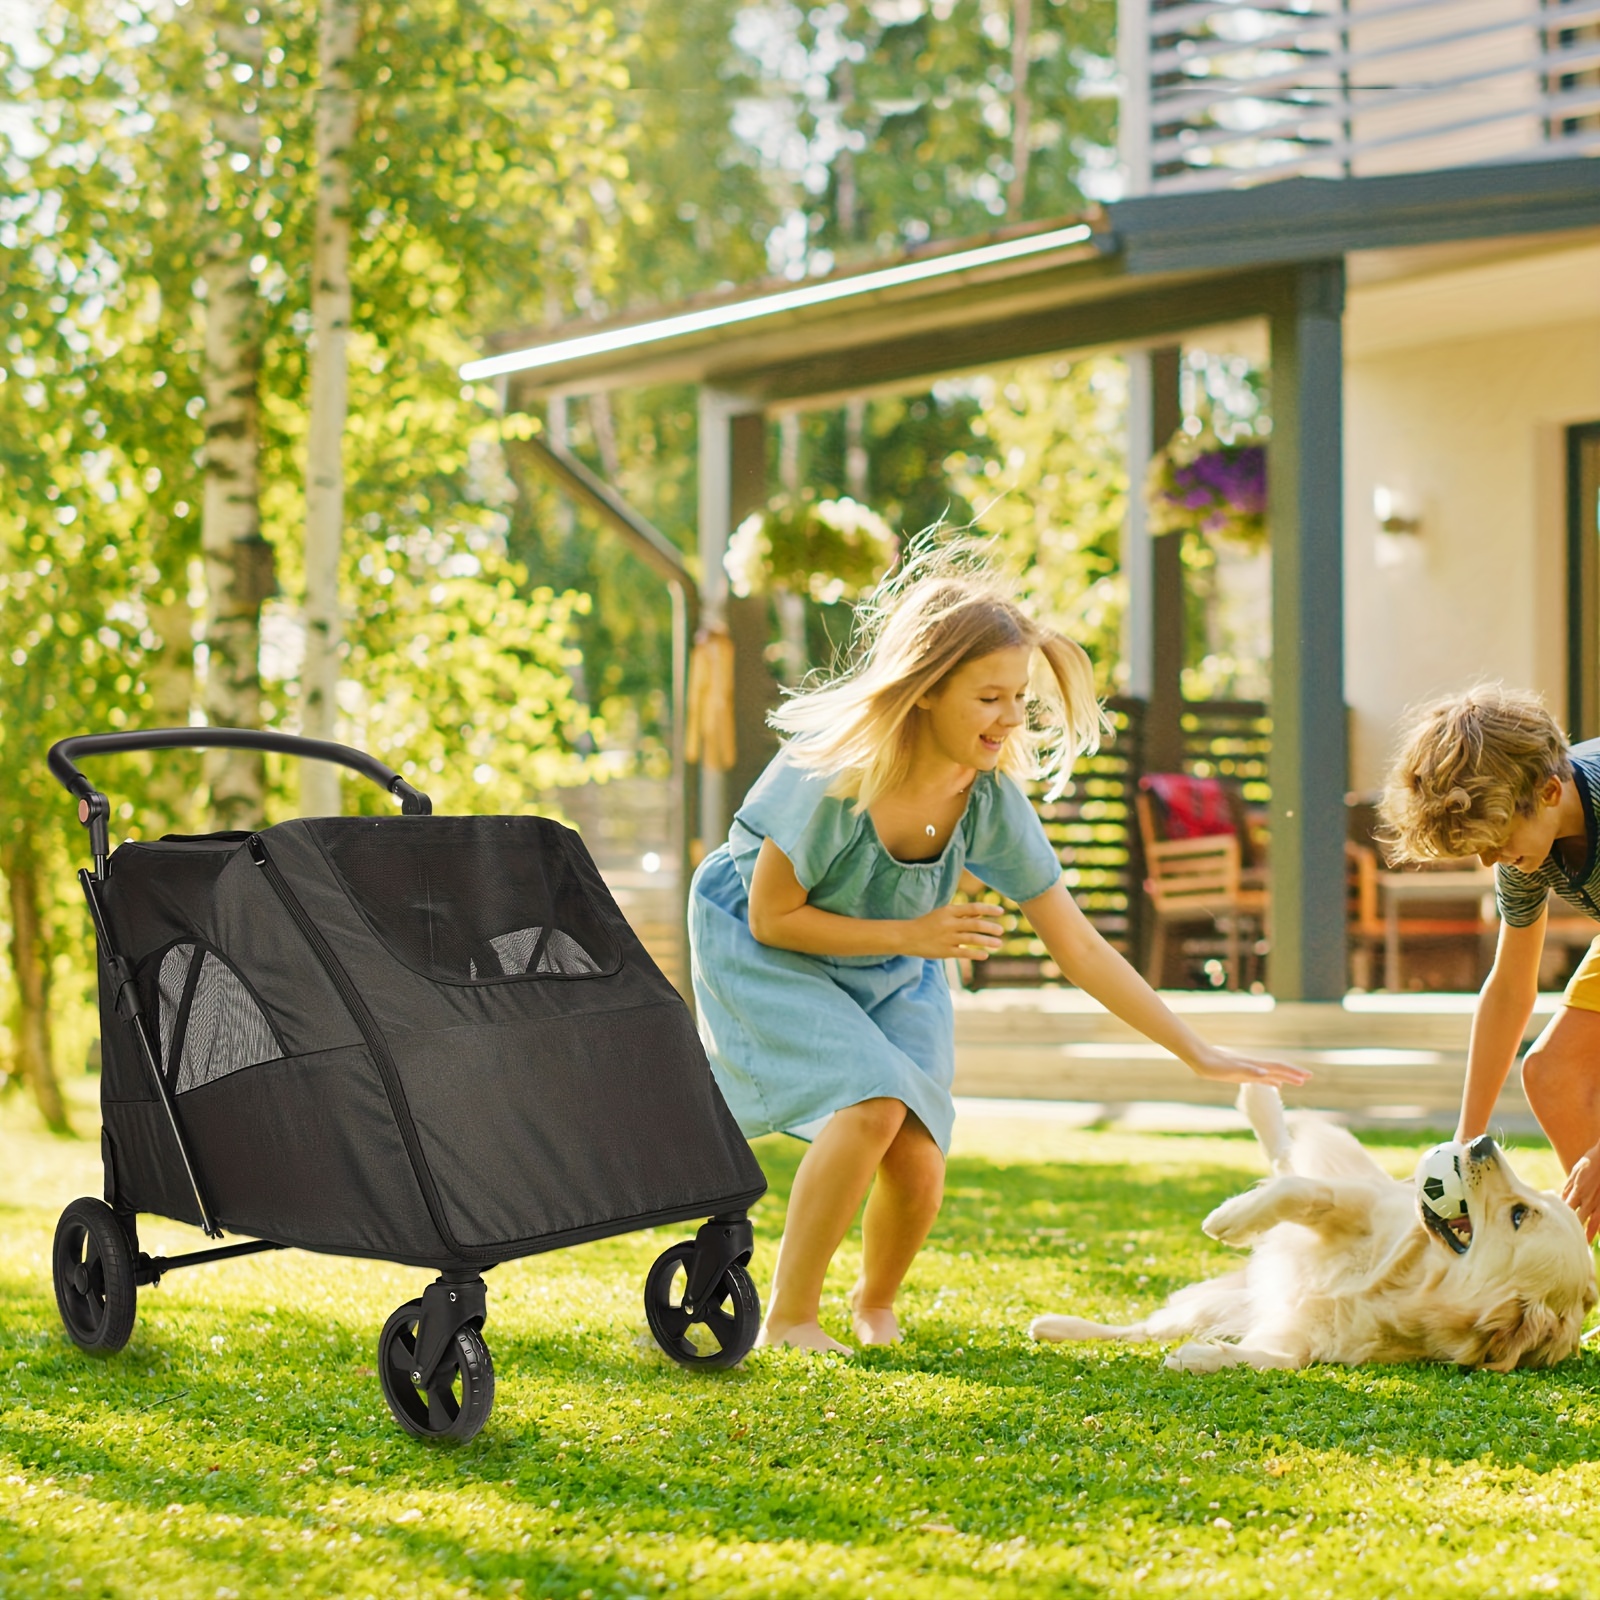 

Dog Stroller For Large Giant Dogs - Upto 120 Lbs Pet Jogger Wagon, Travel Folding Carrier With Adjustable Handle, Sunroof, Rear Brake, Security Leash